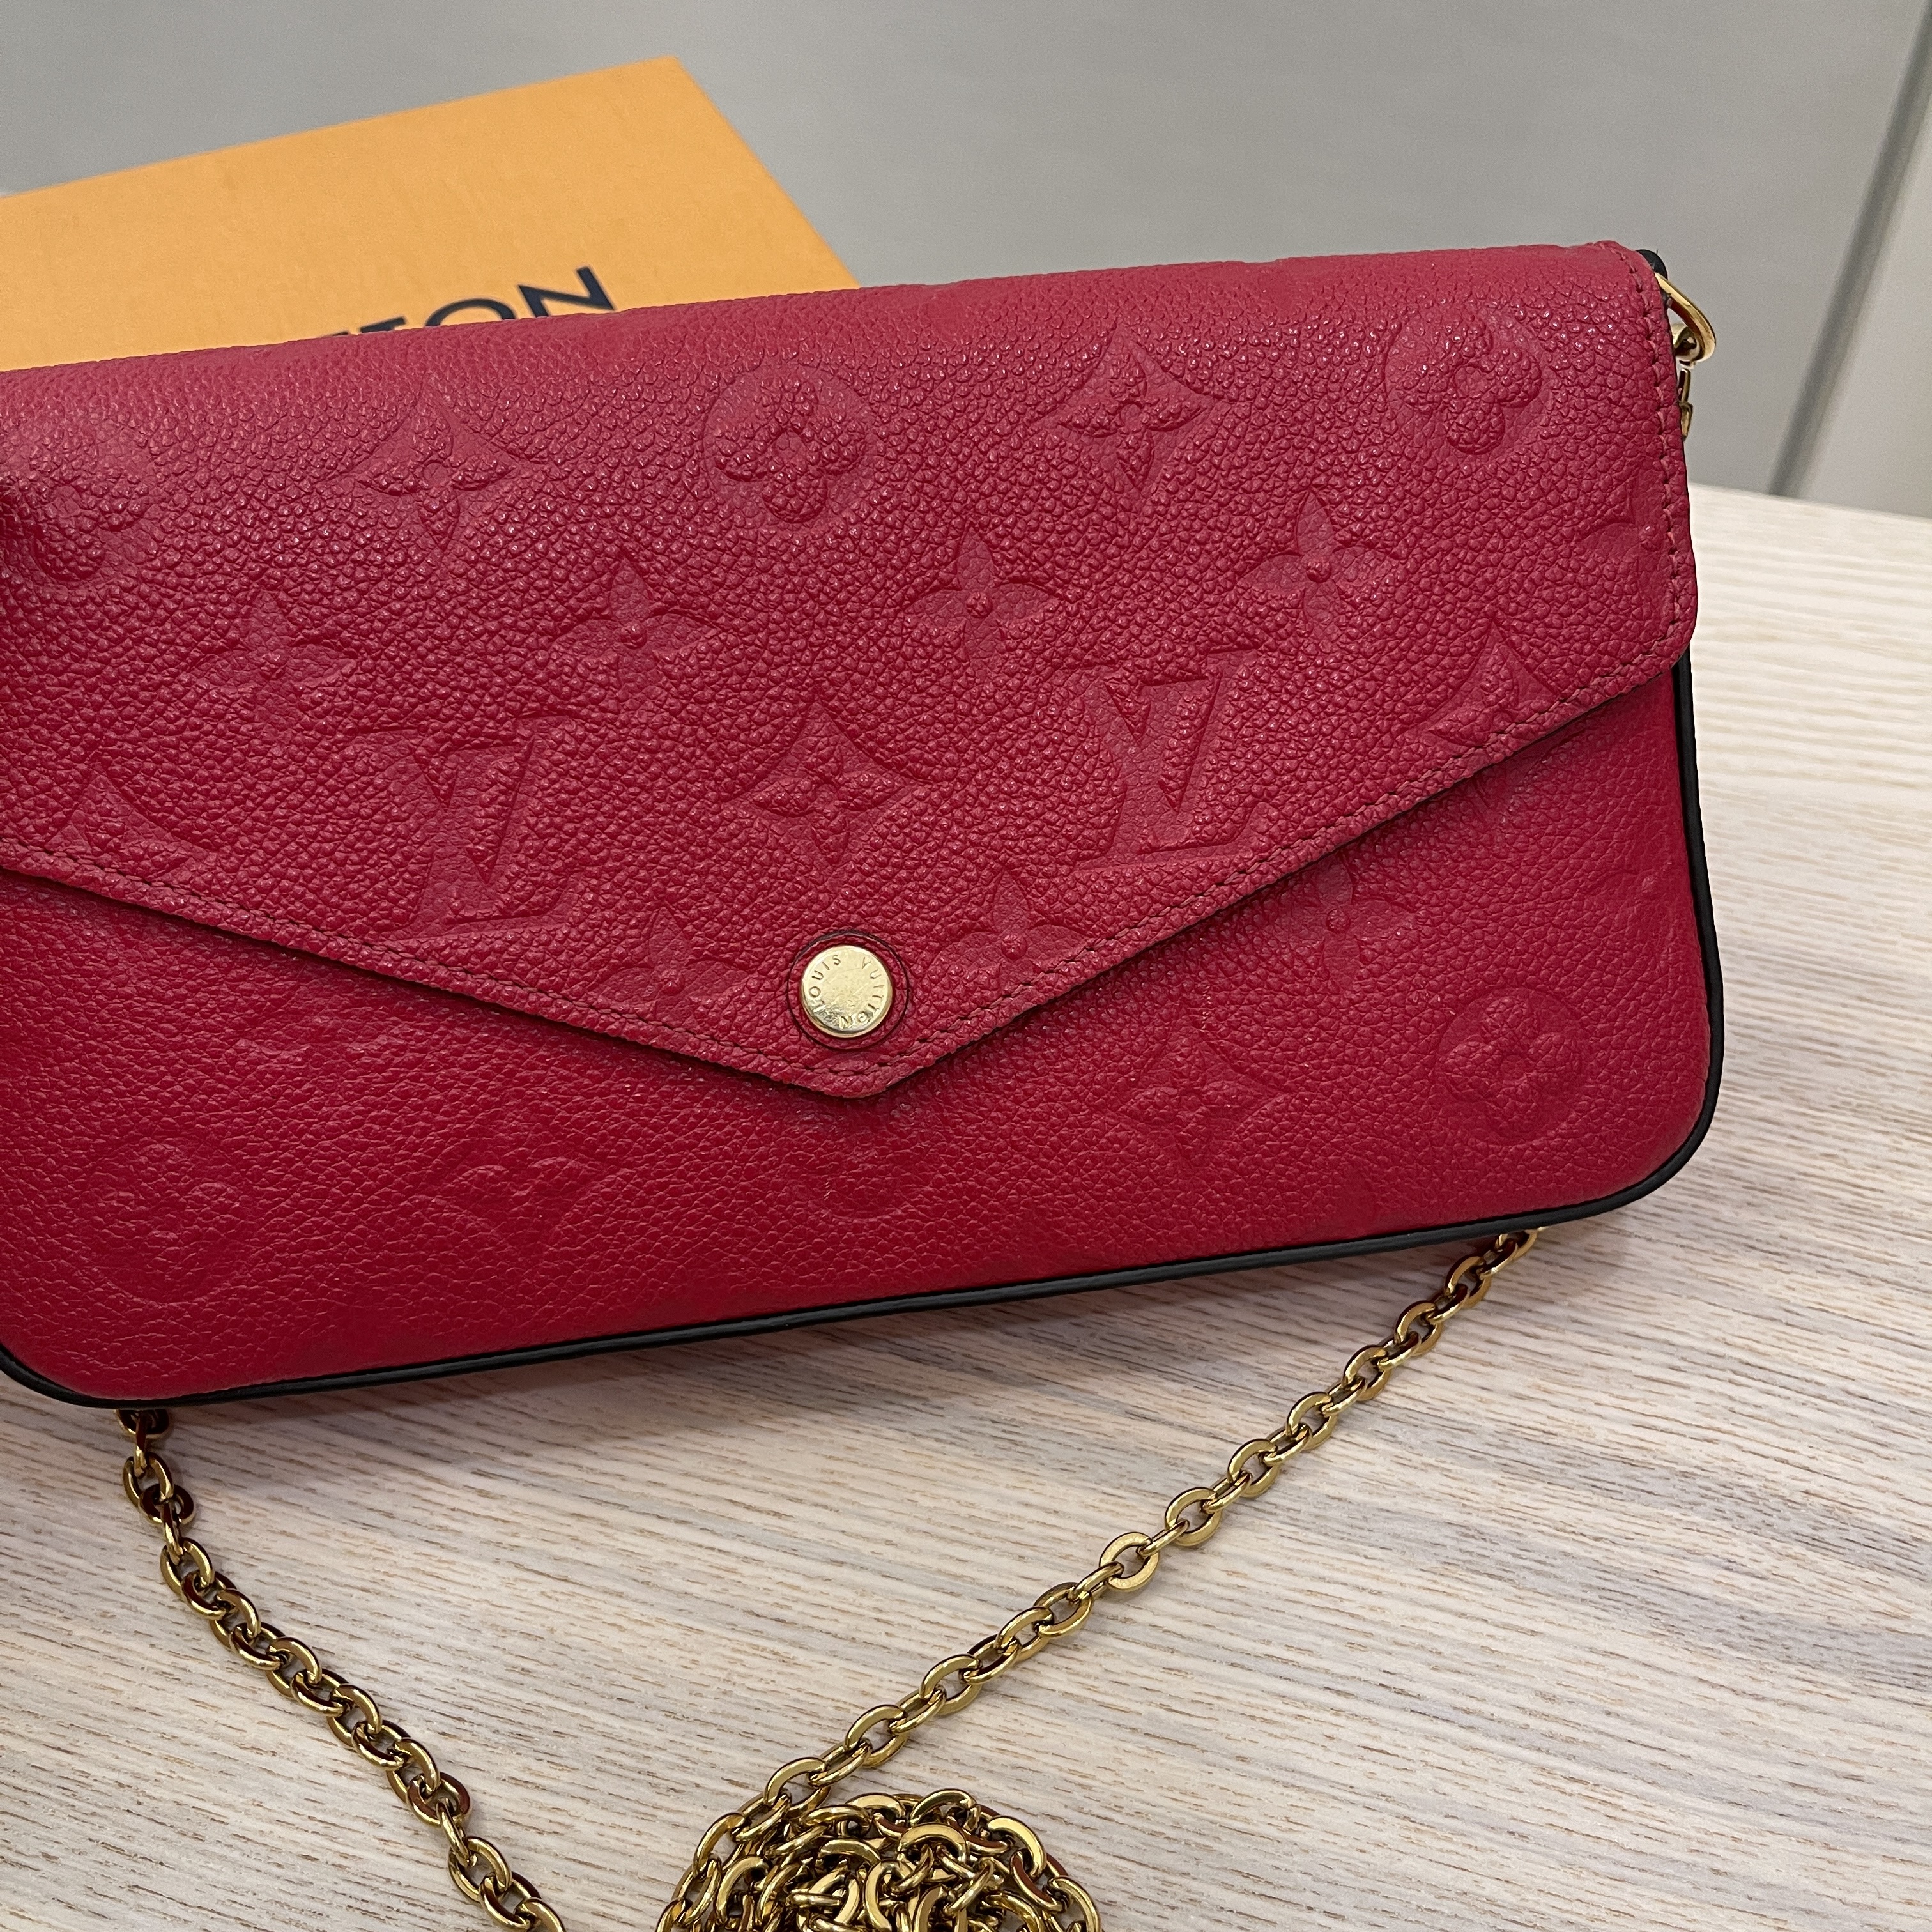 Louis Vuitton Credit Card Cerise Red Insert from Felicie Pochette